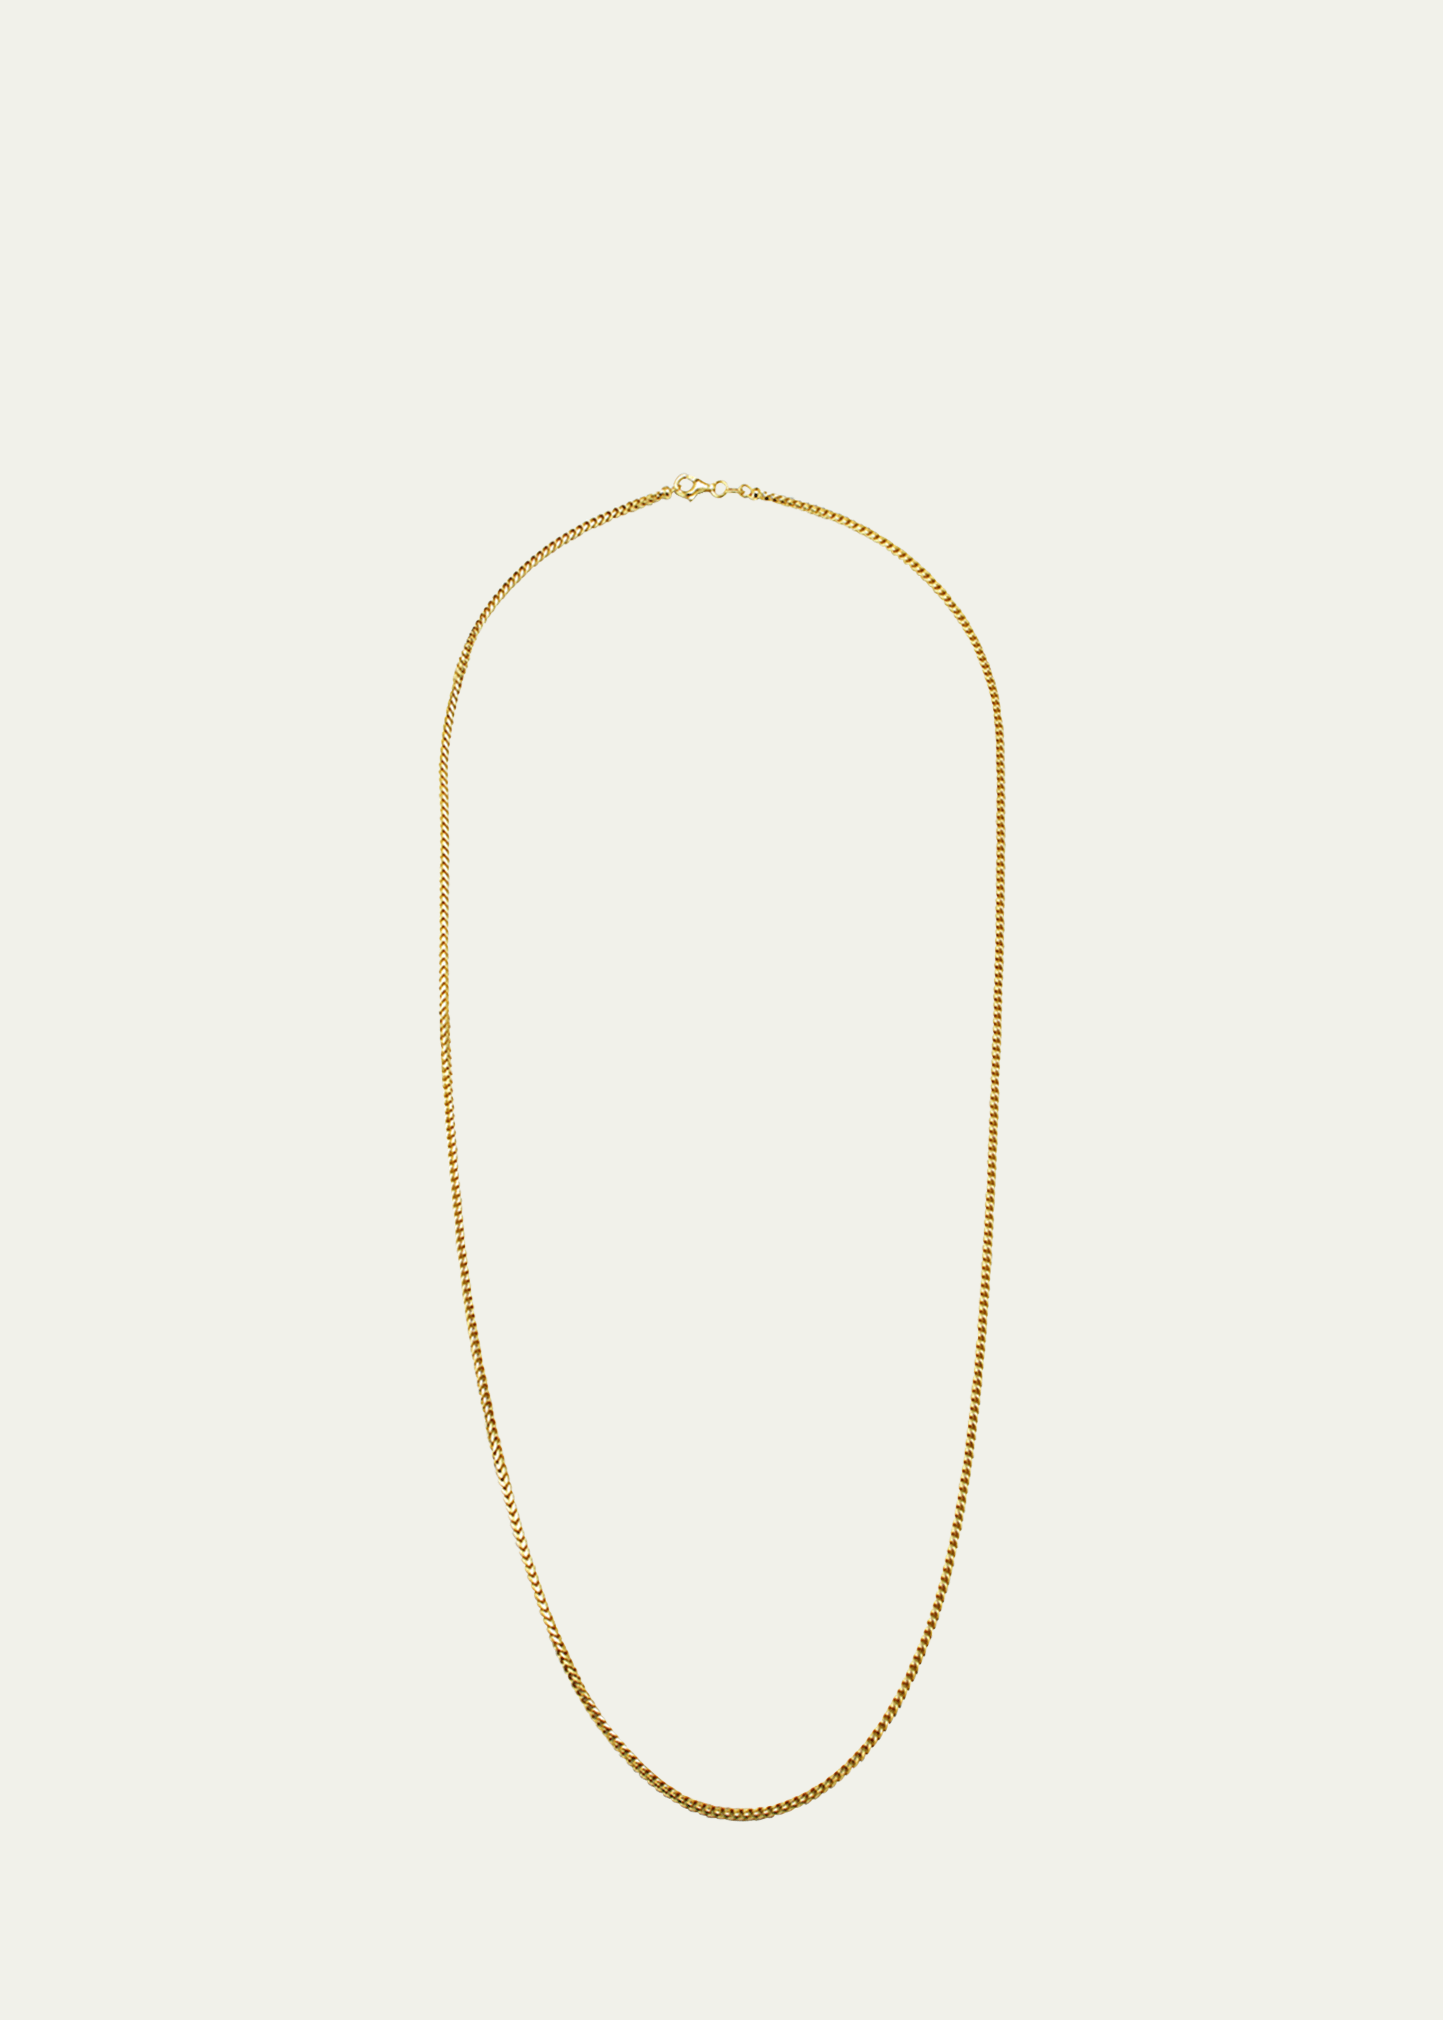 Men's 14K Yellow Gold Small Franco Chain Necklace, 26"L